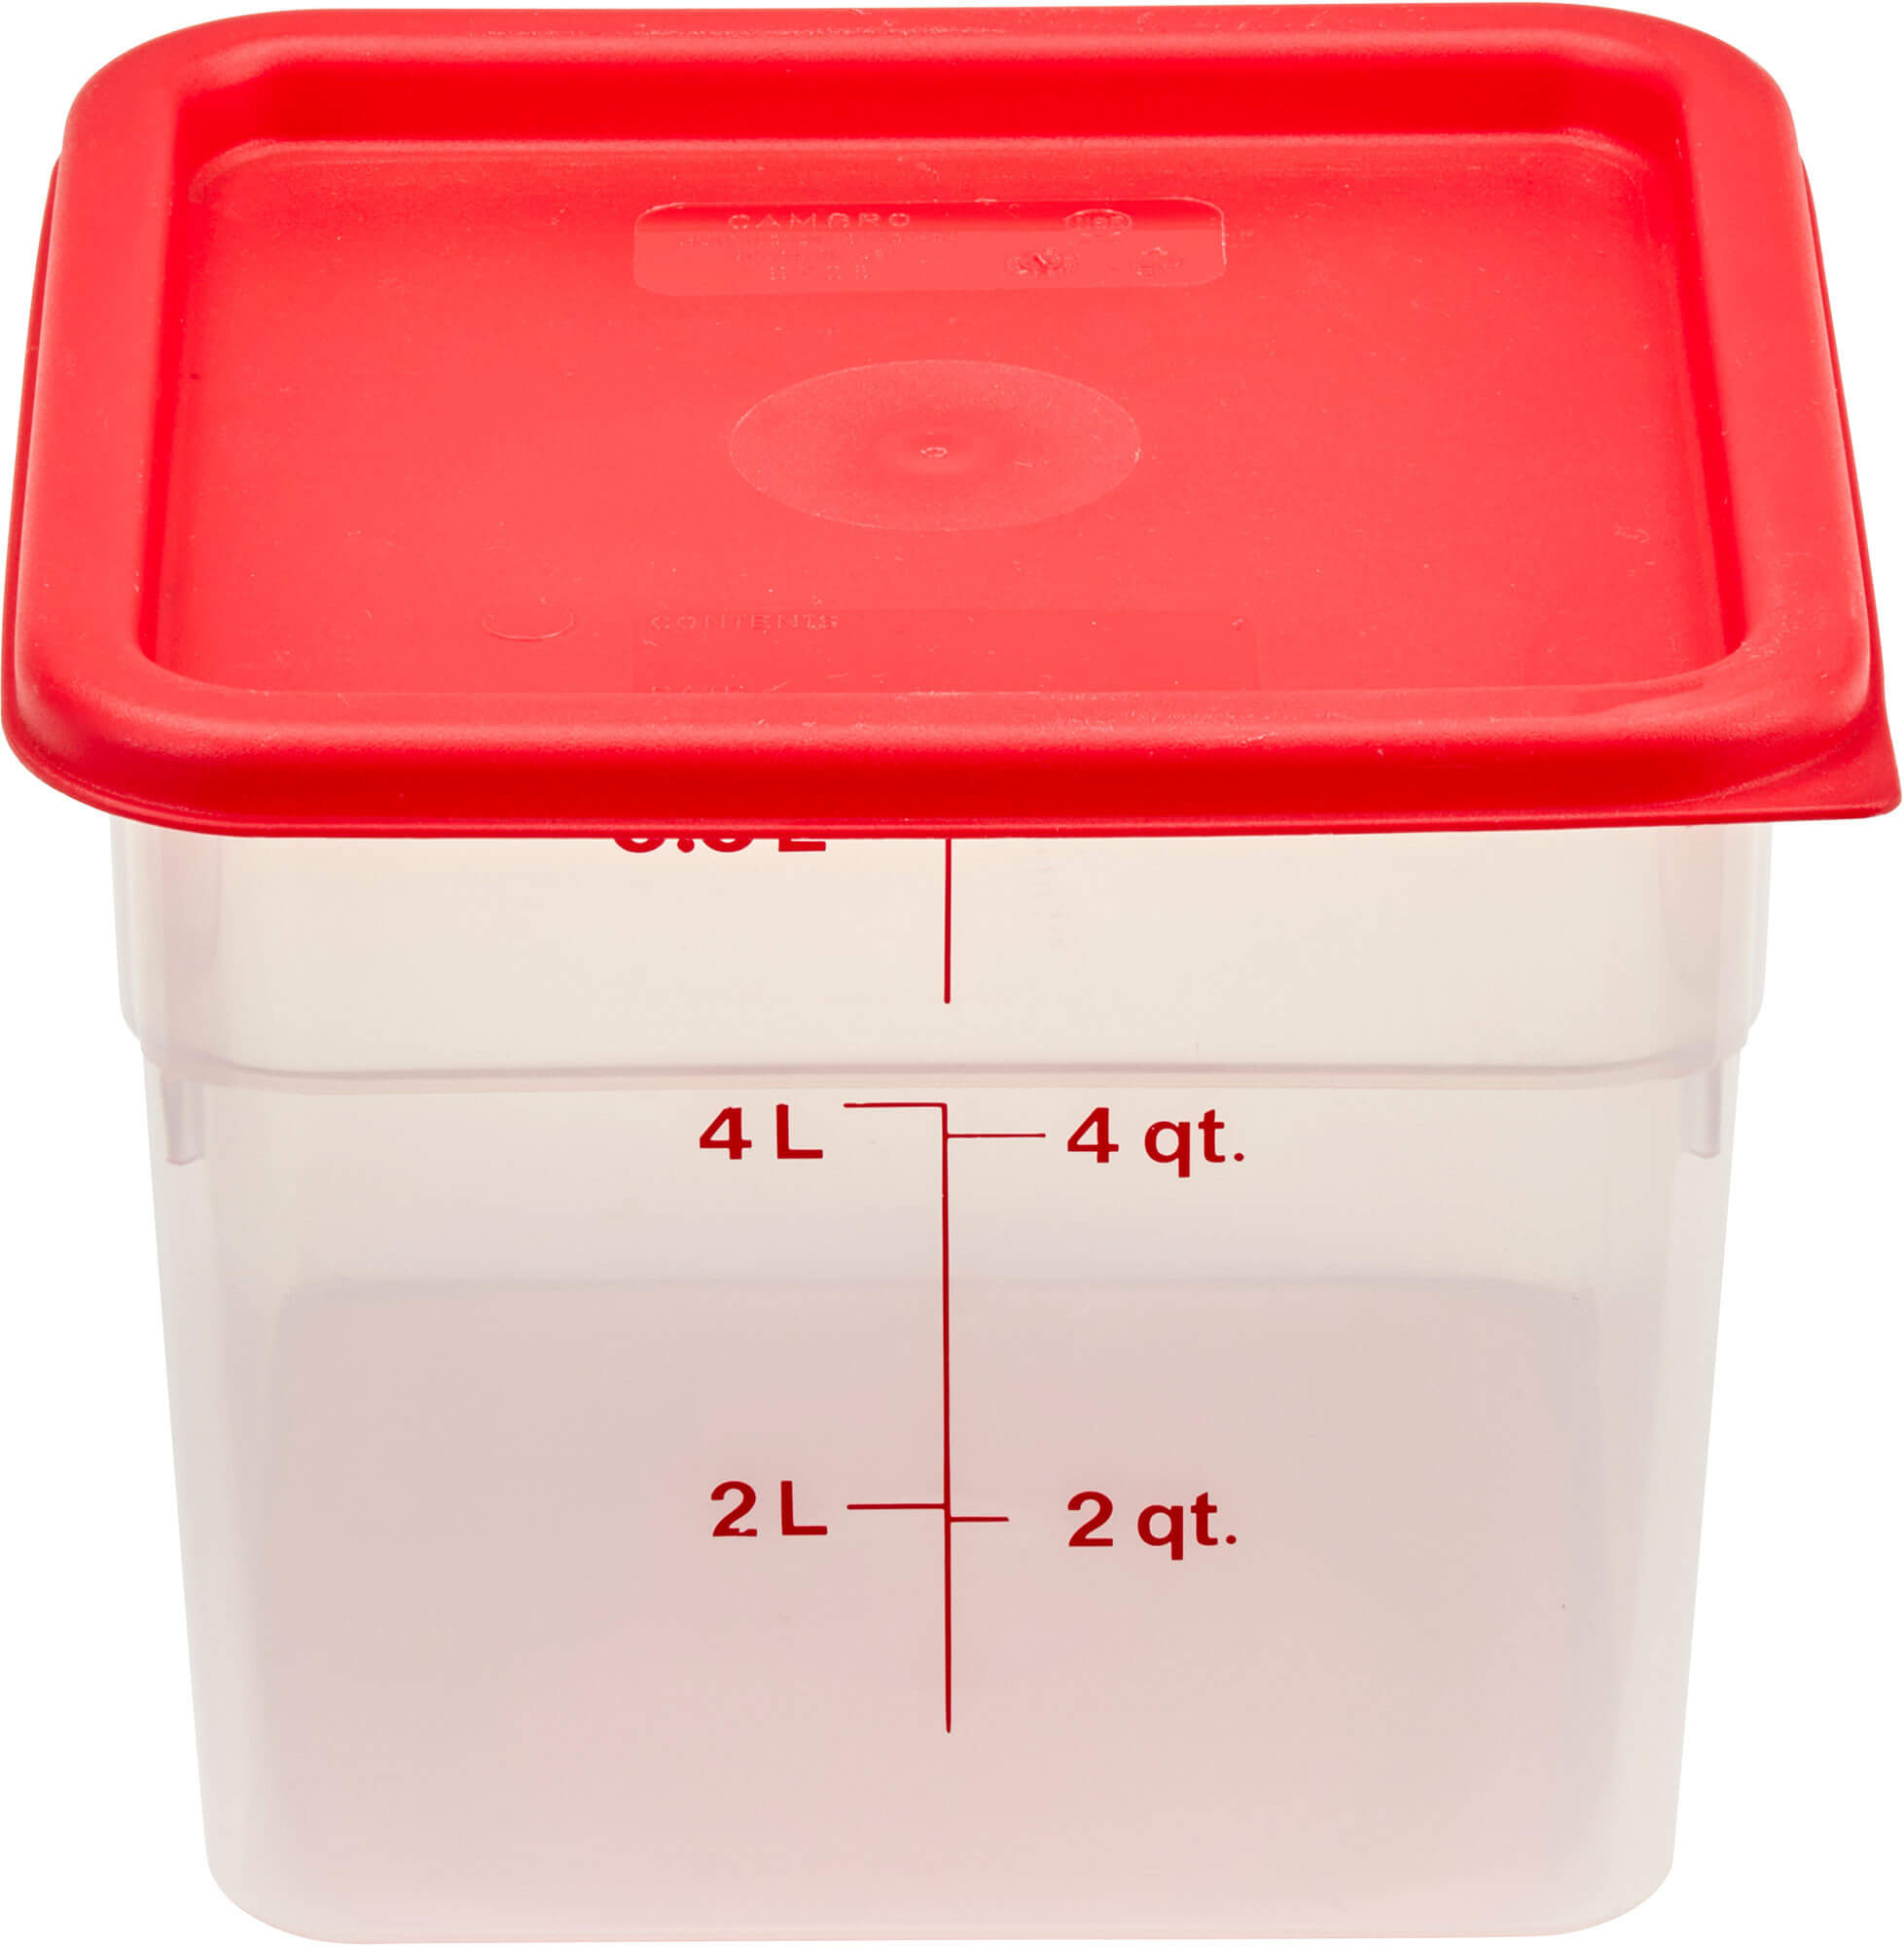 Cambro 6SFSPP190 Translucent Food Container with Lid, 6-Quart, Red